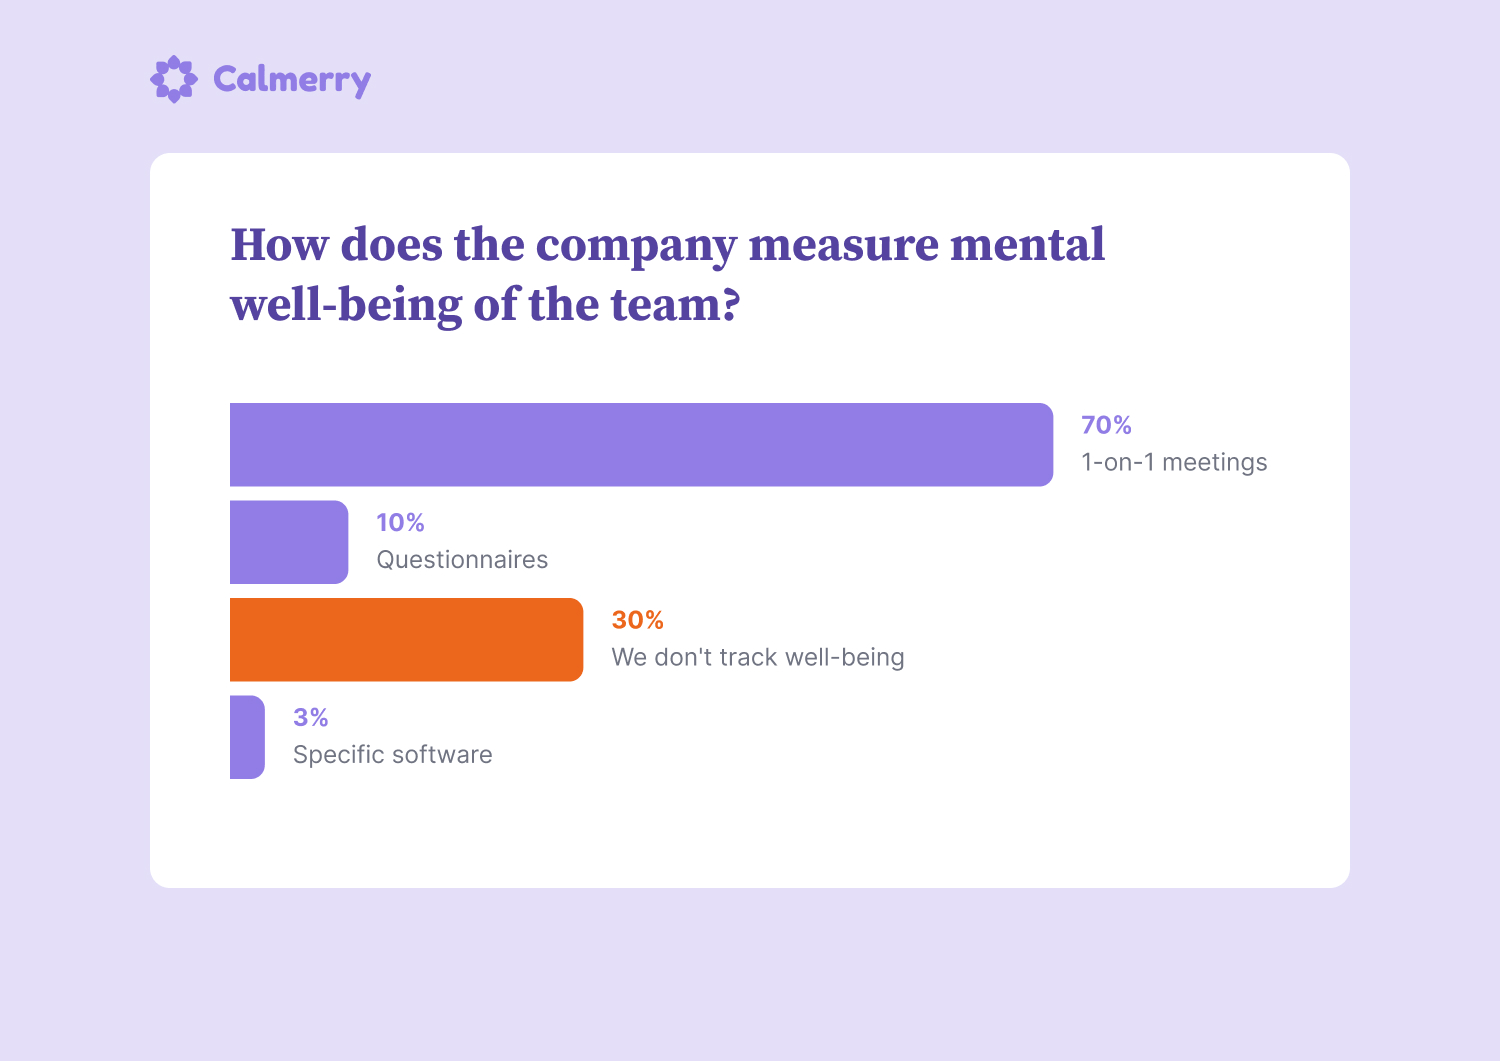 How does the company measure mental well-being of the team? 1-on-1 meetings 70% Questionnaires 10% We don't track well-being 30% Specific software 3%